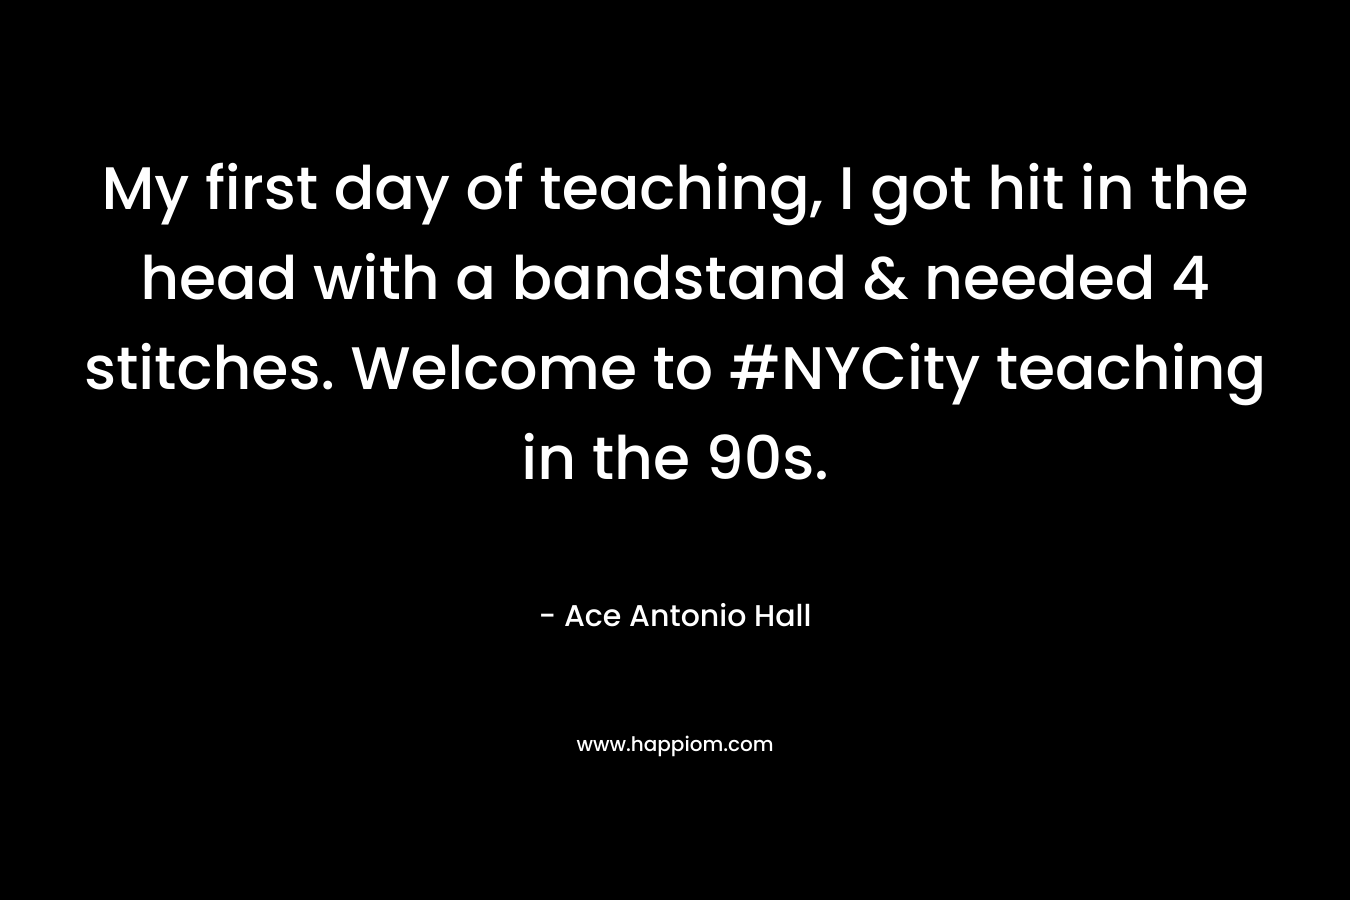 My first day of teaching, I got hit in the head with a bandstand & needed 4 stitches. Welcome to #NYCity teaching in the 90s.